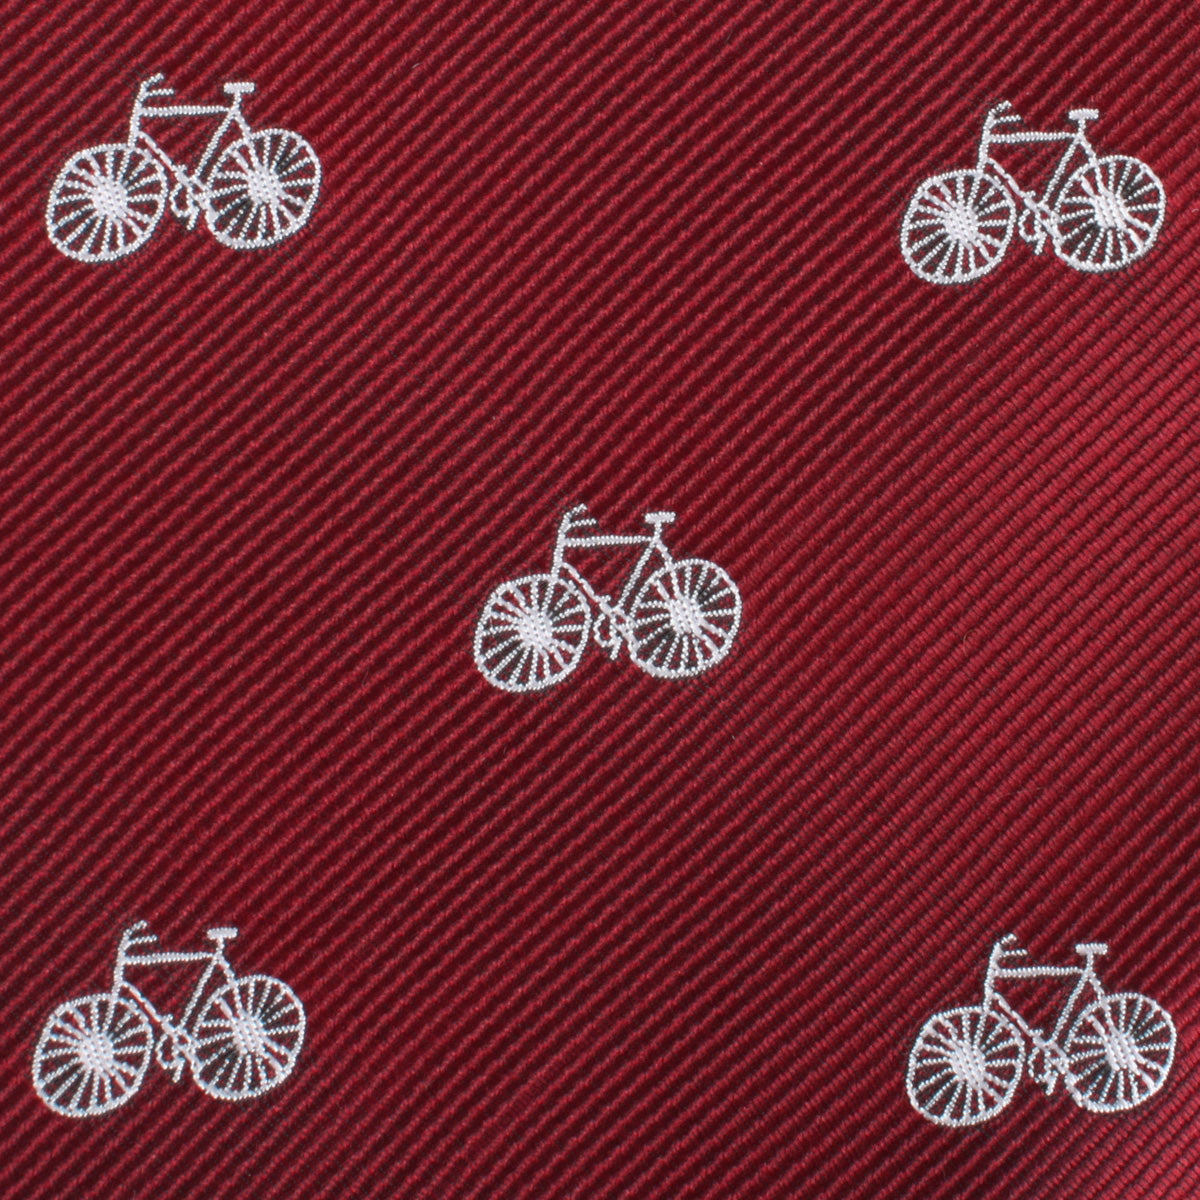 Burgundy French Bicycle Pocket Square Fabric